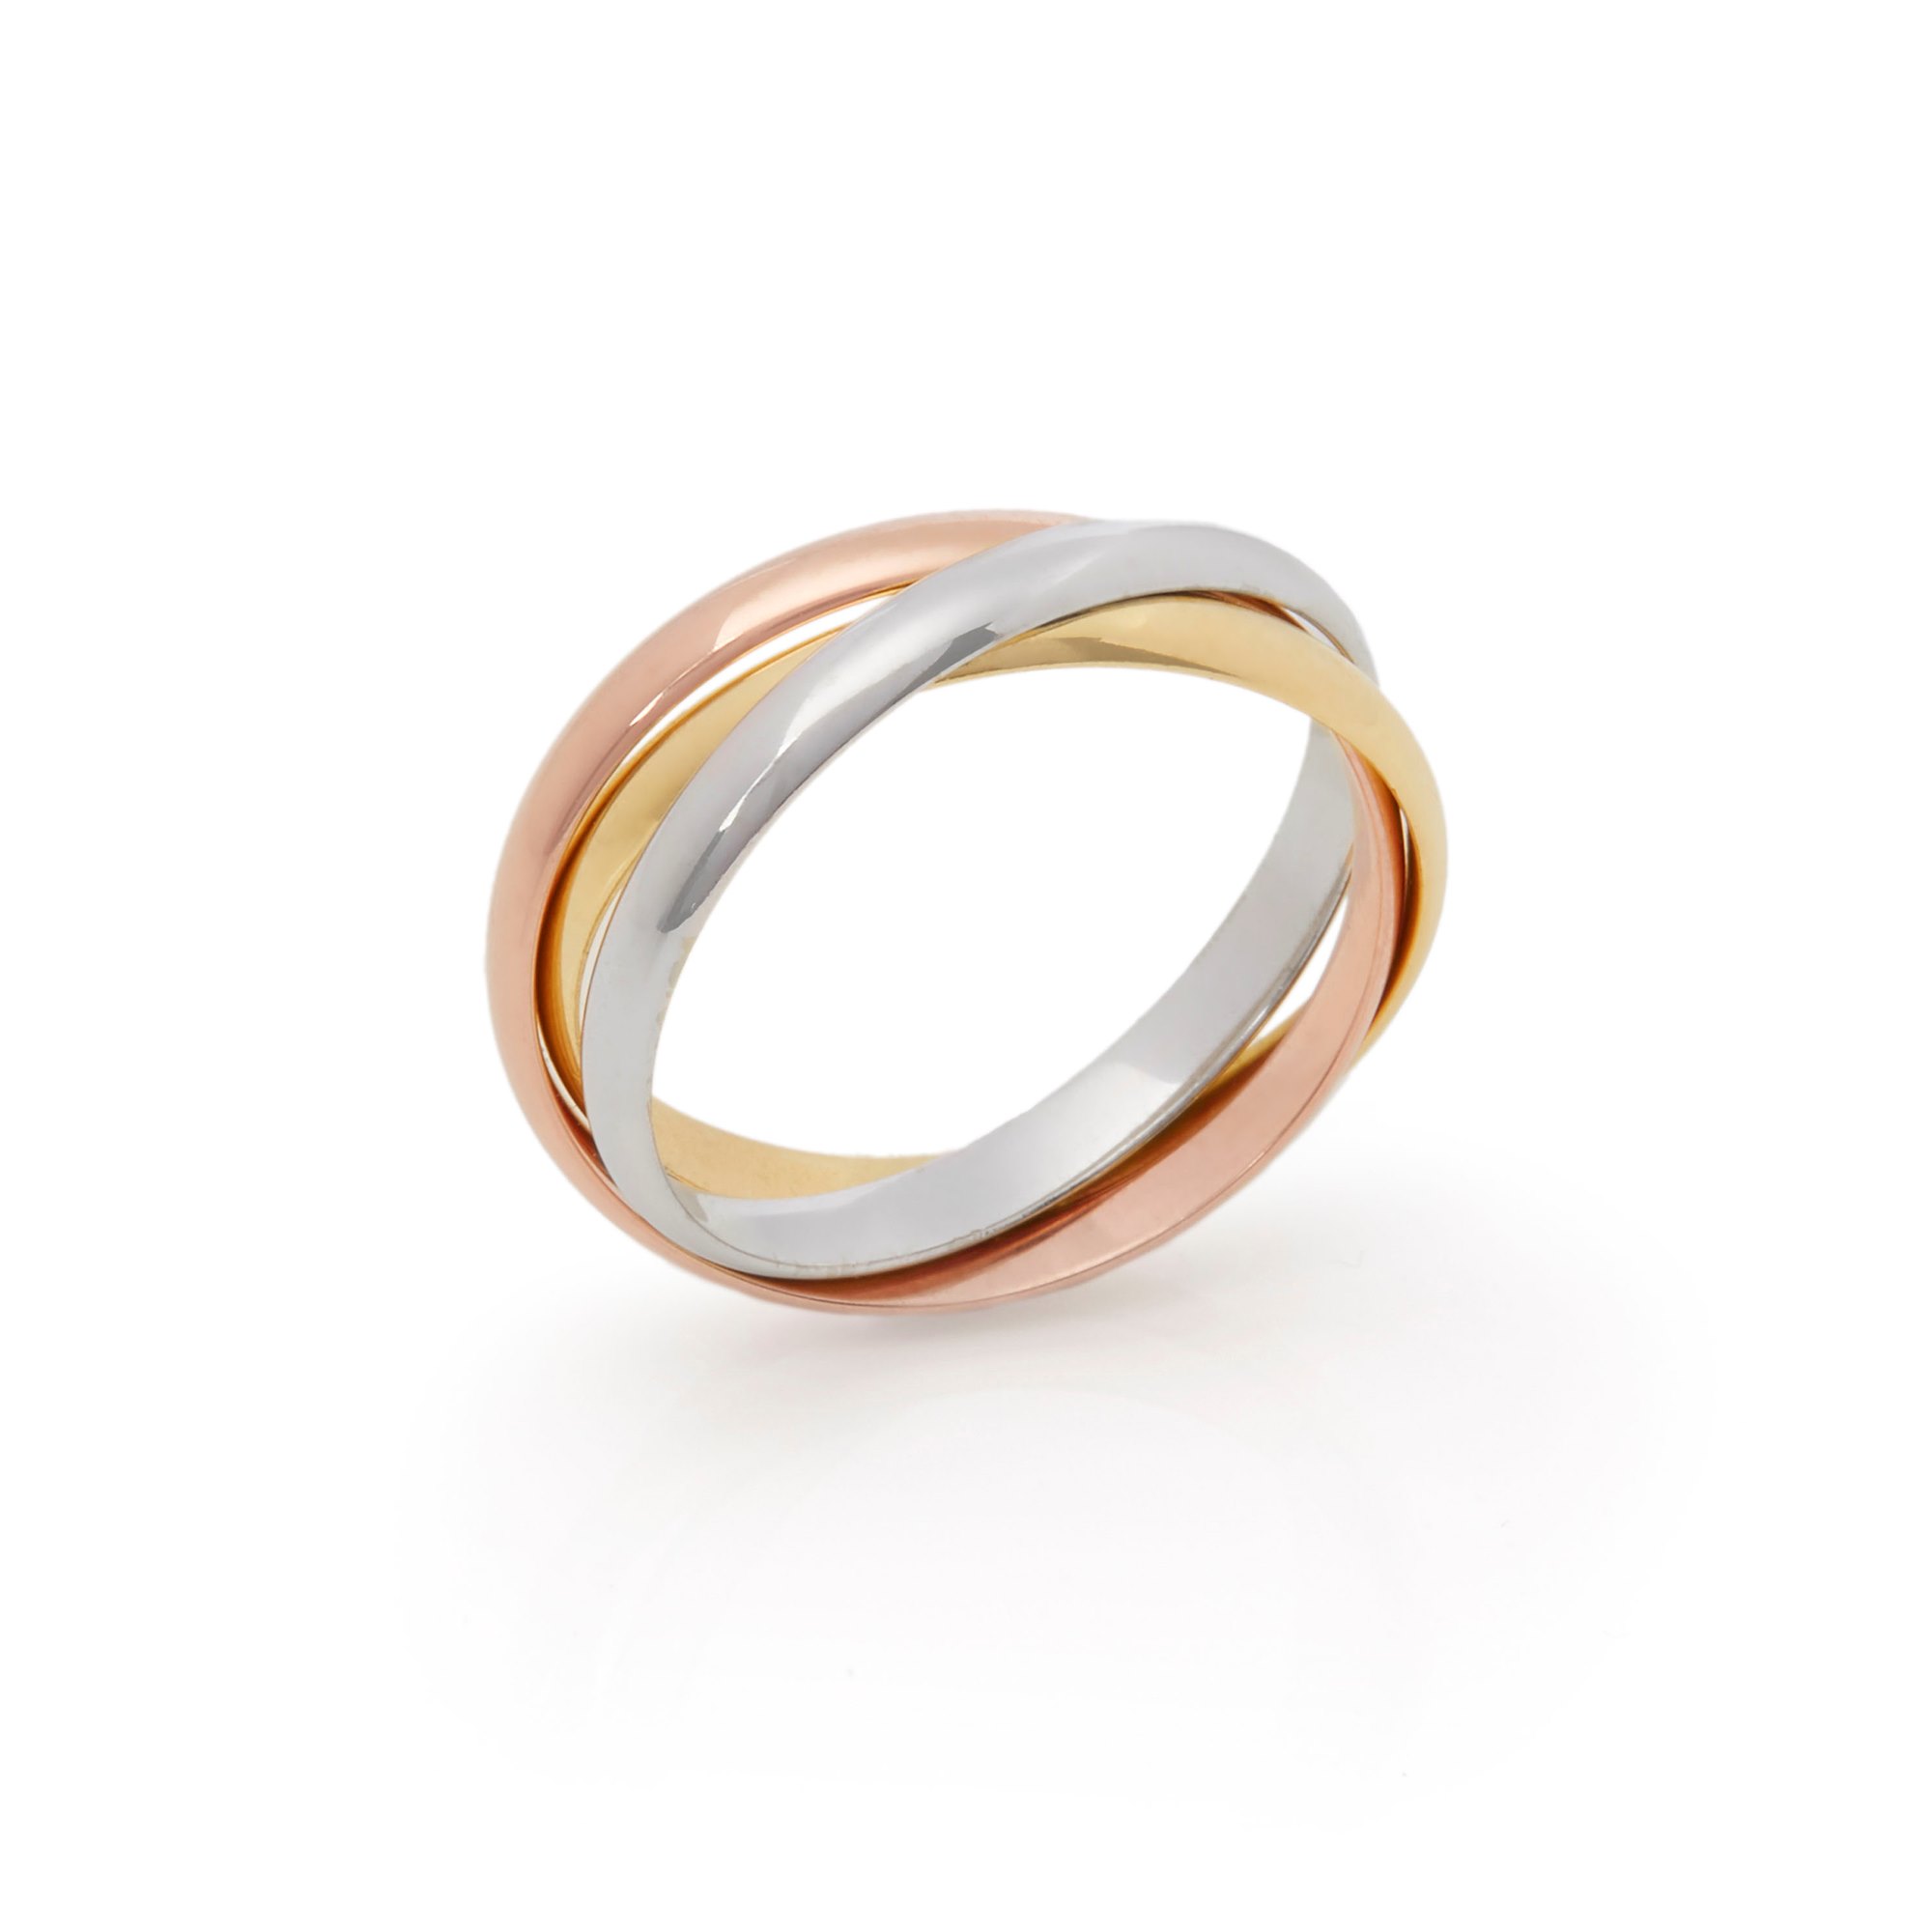 Cartier 18k Yellow, White & Rose Gold Small Trinity Ring